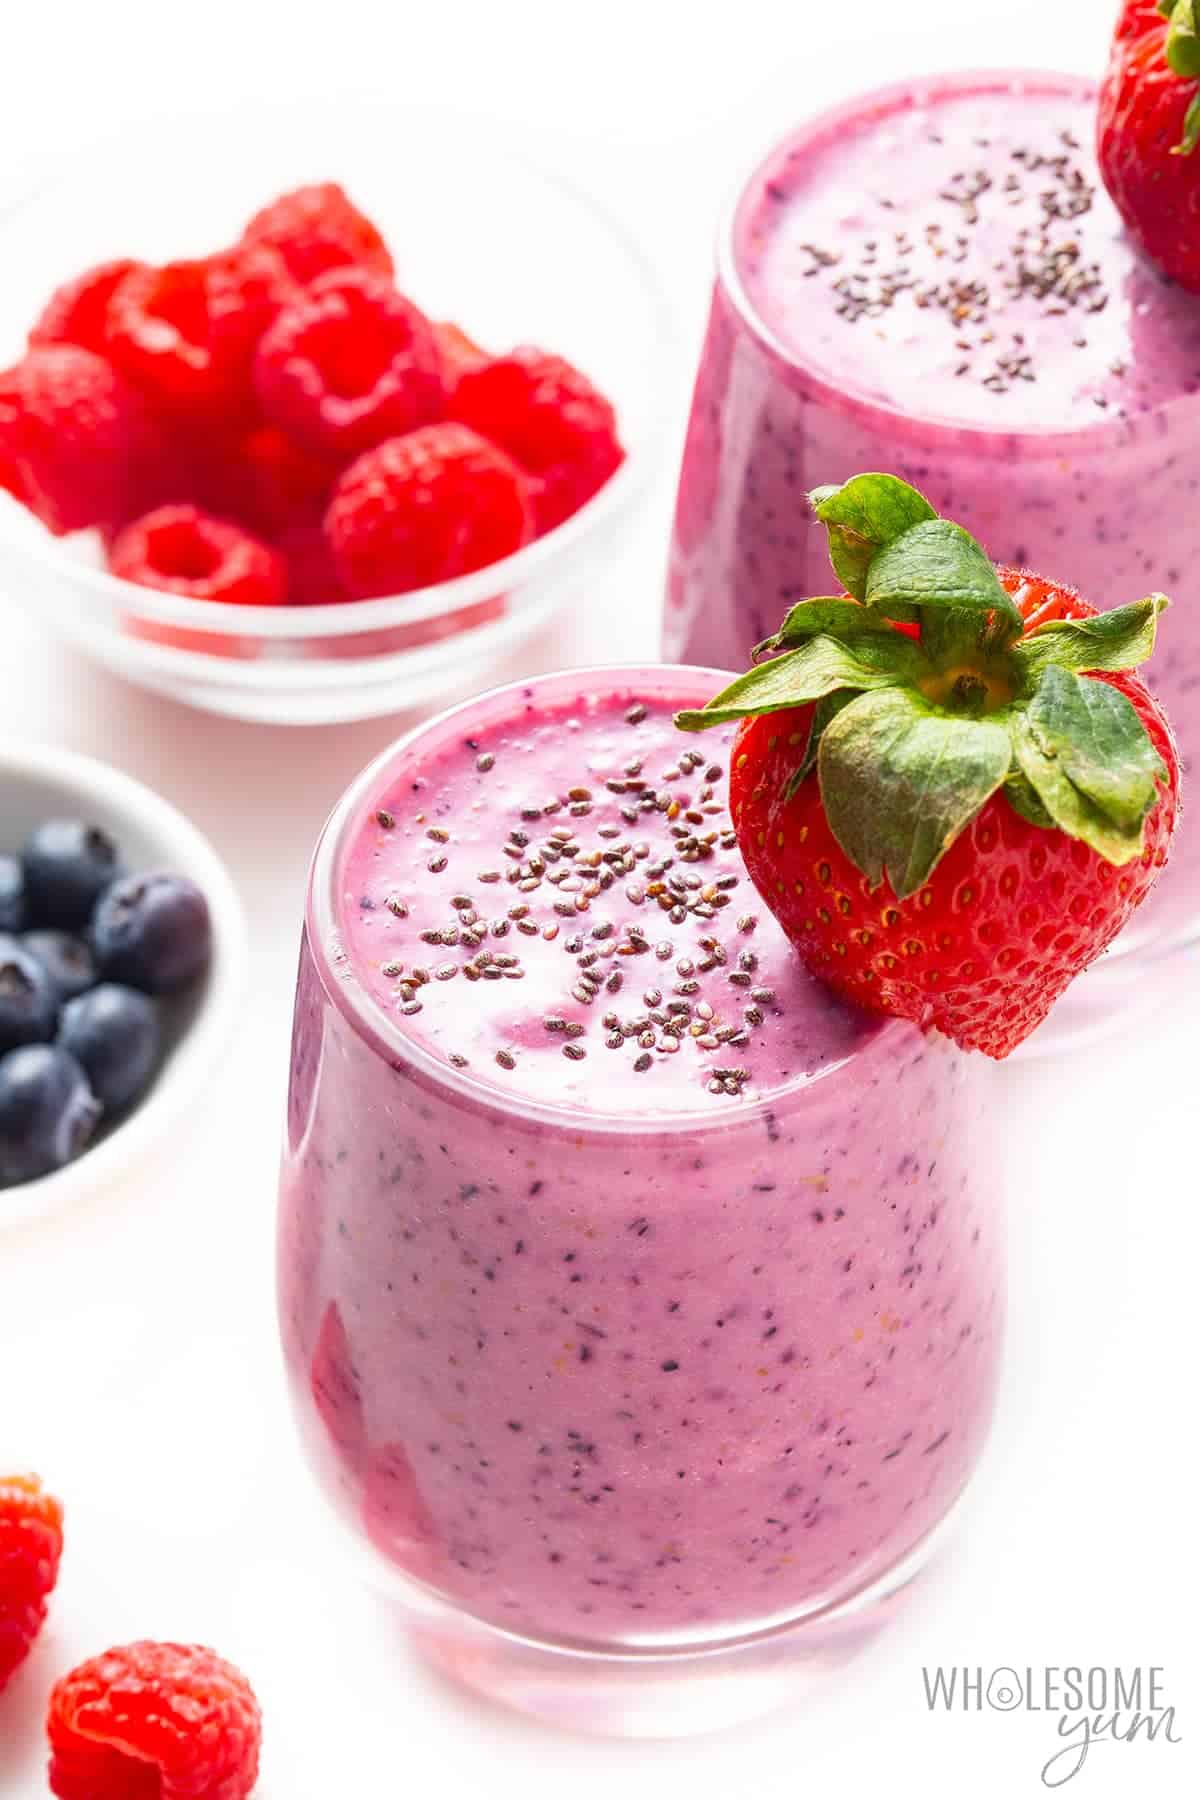 Low carb protein shakes in glasses with berries in background.